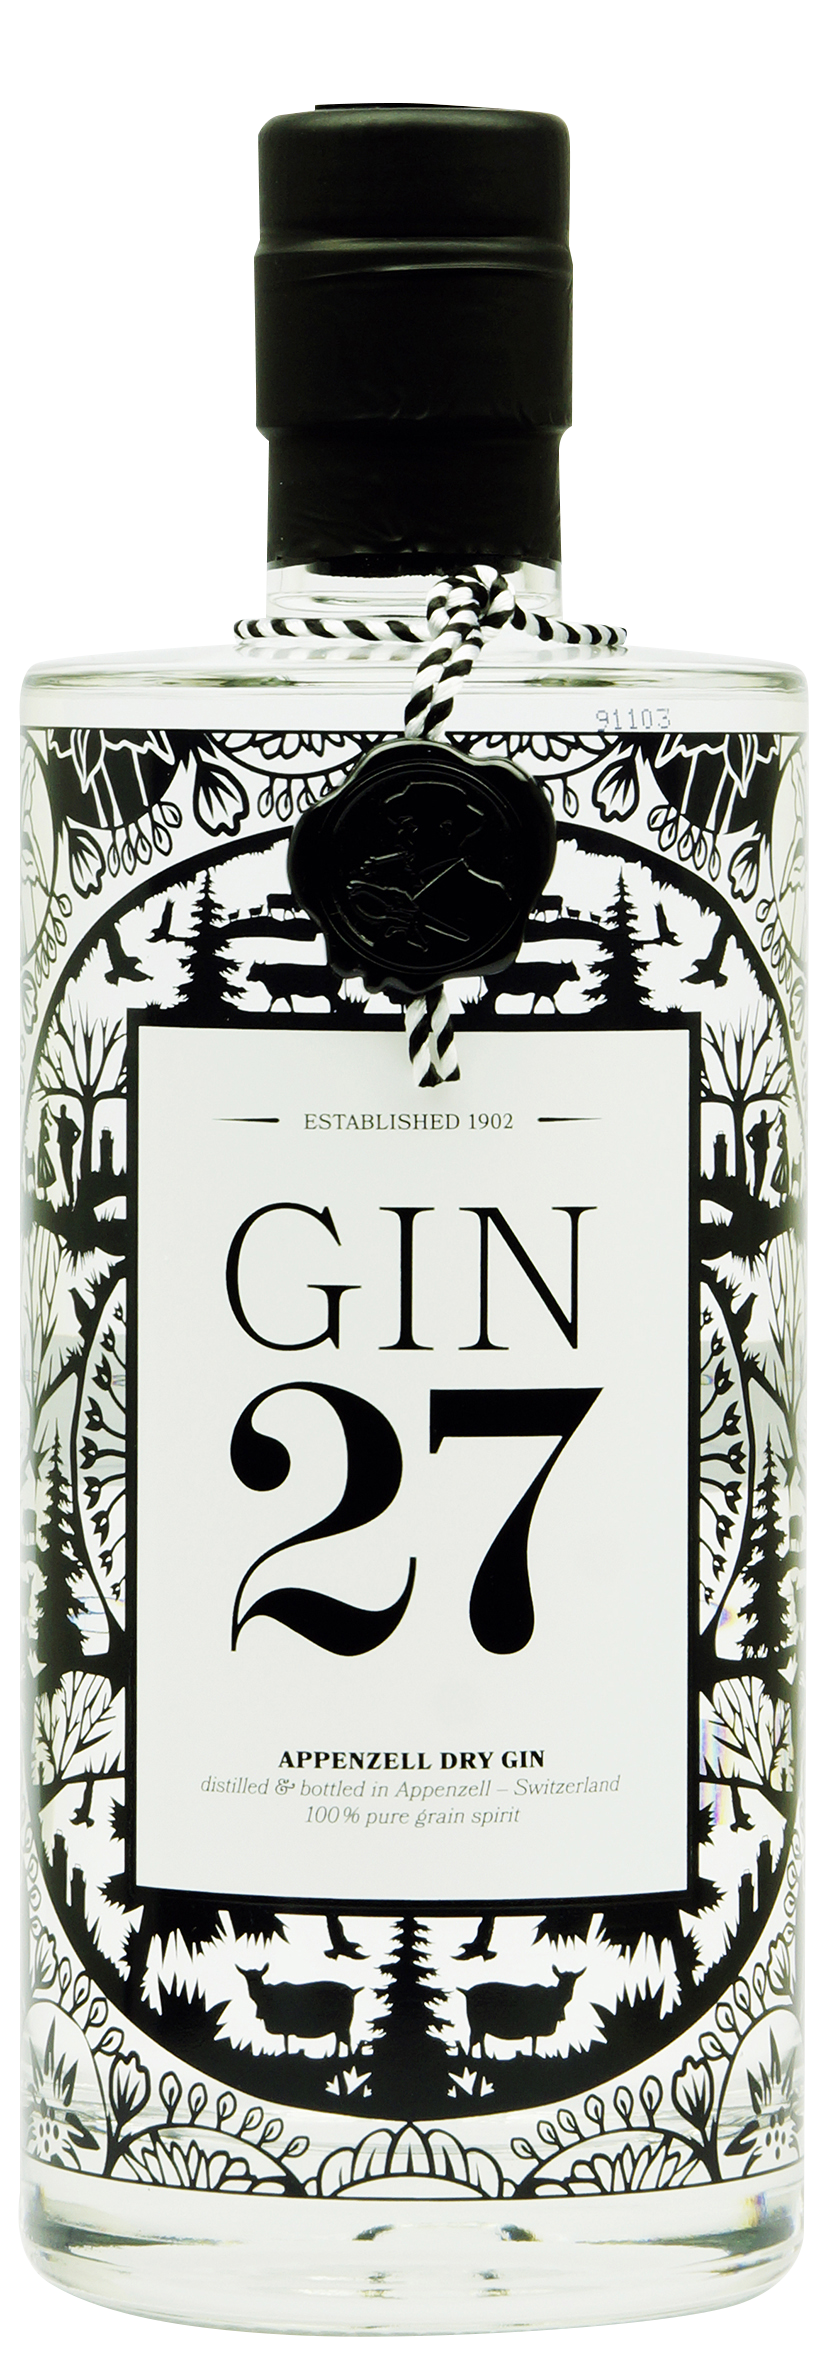 Appenzell Dry Gin 27 0